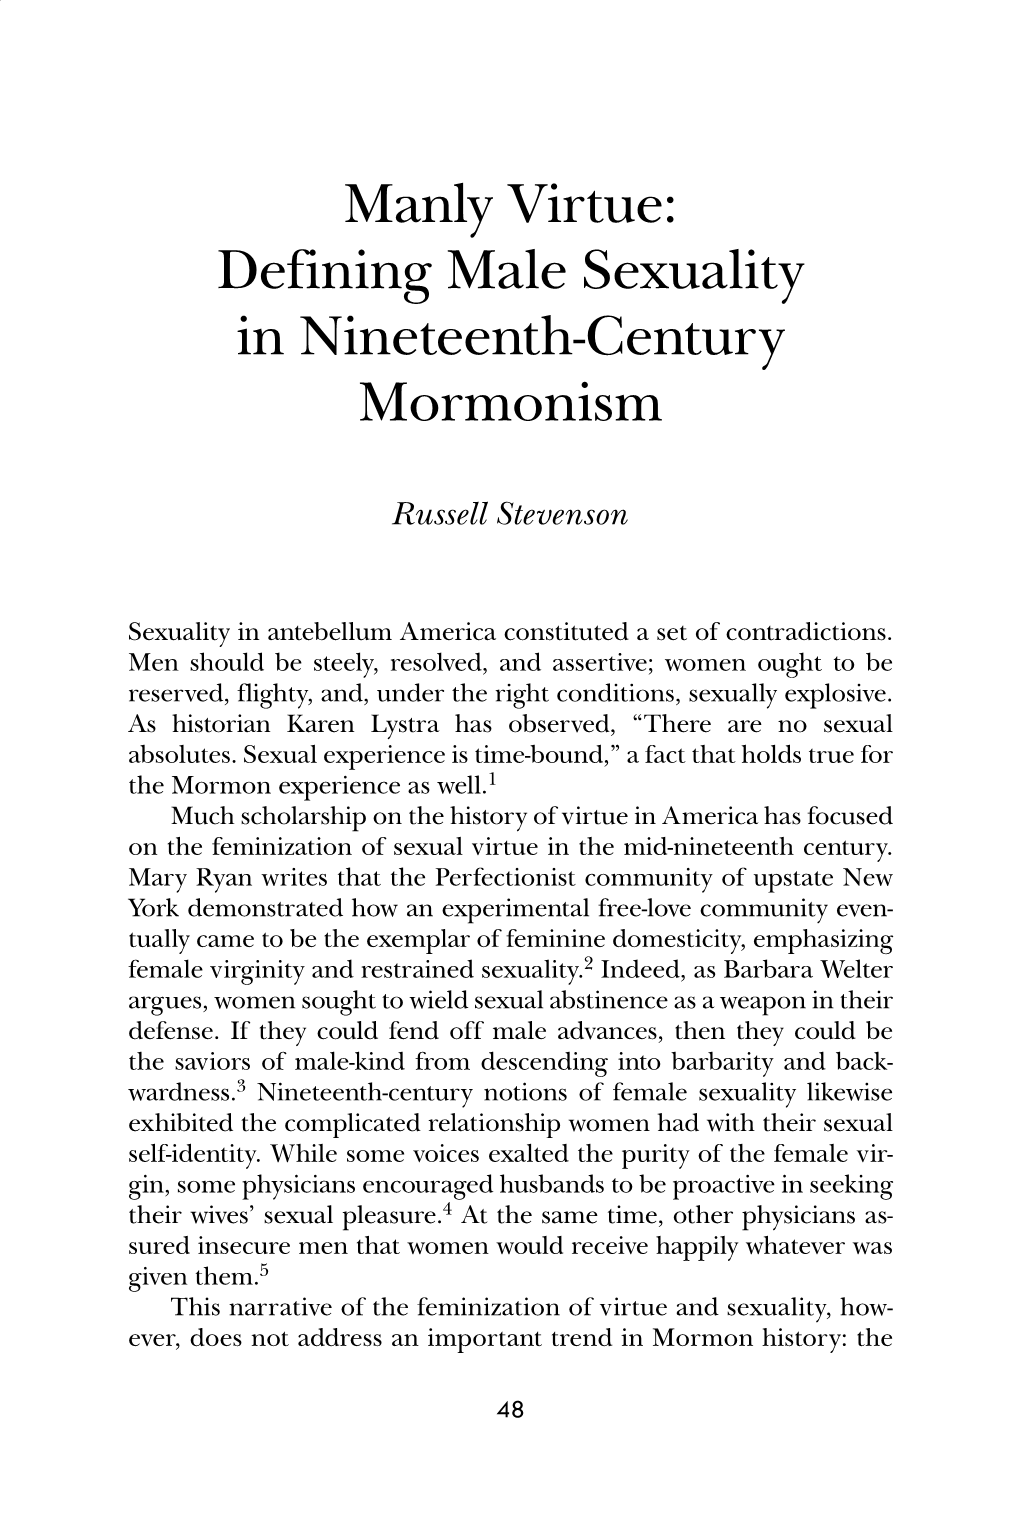 Manly Virtue: Defining Male Sexuality in Nineteenth-Century Mormonism